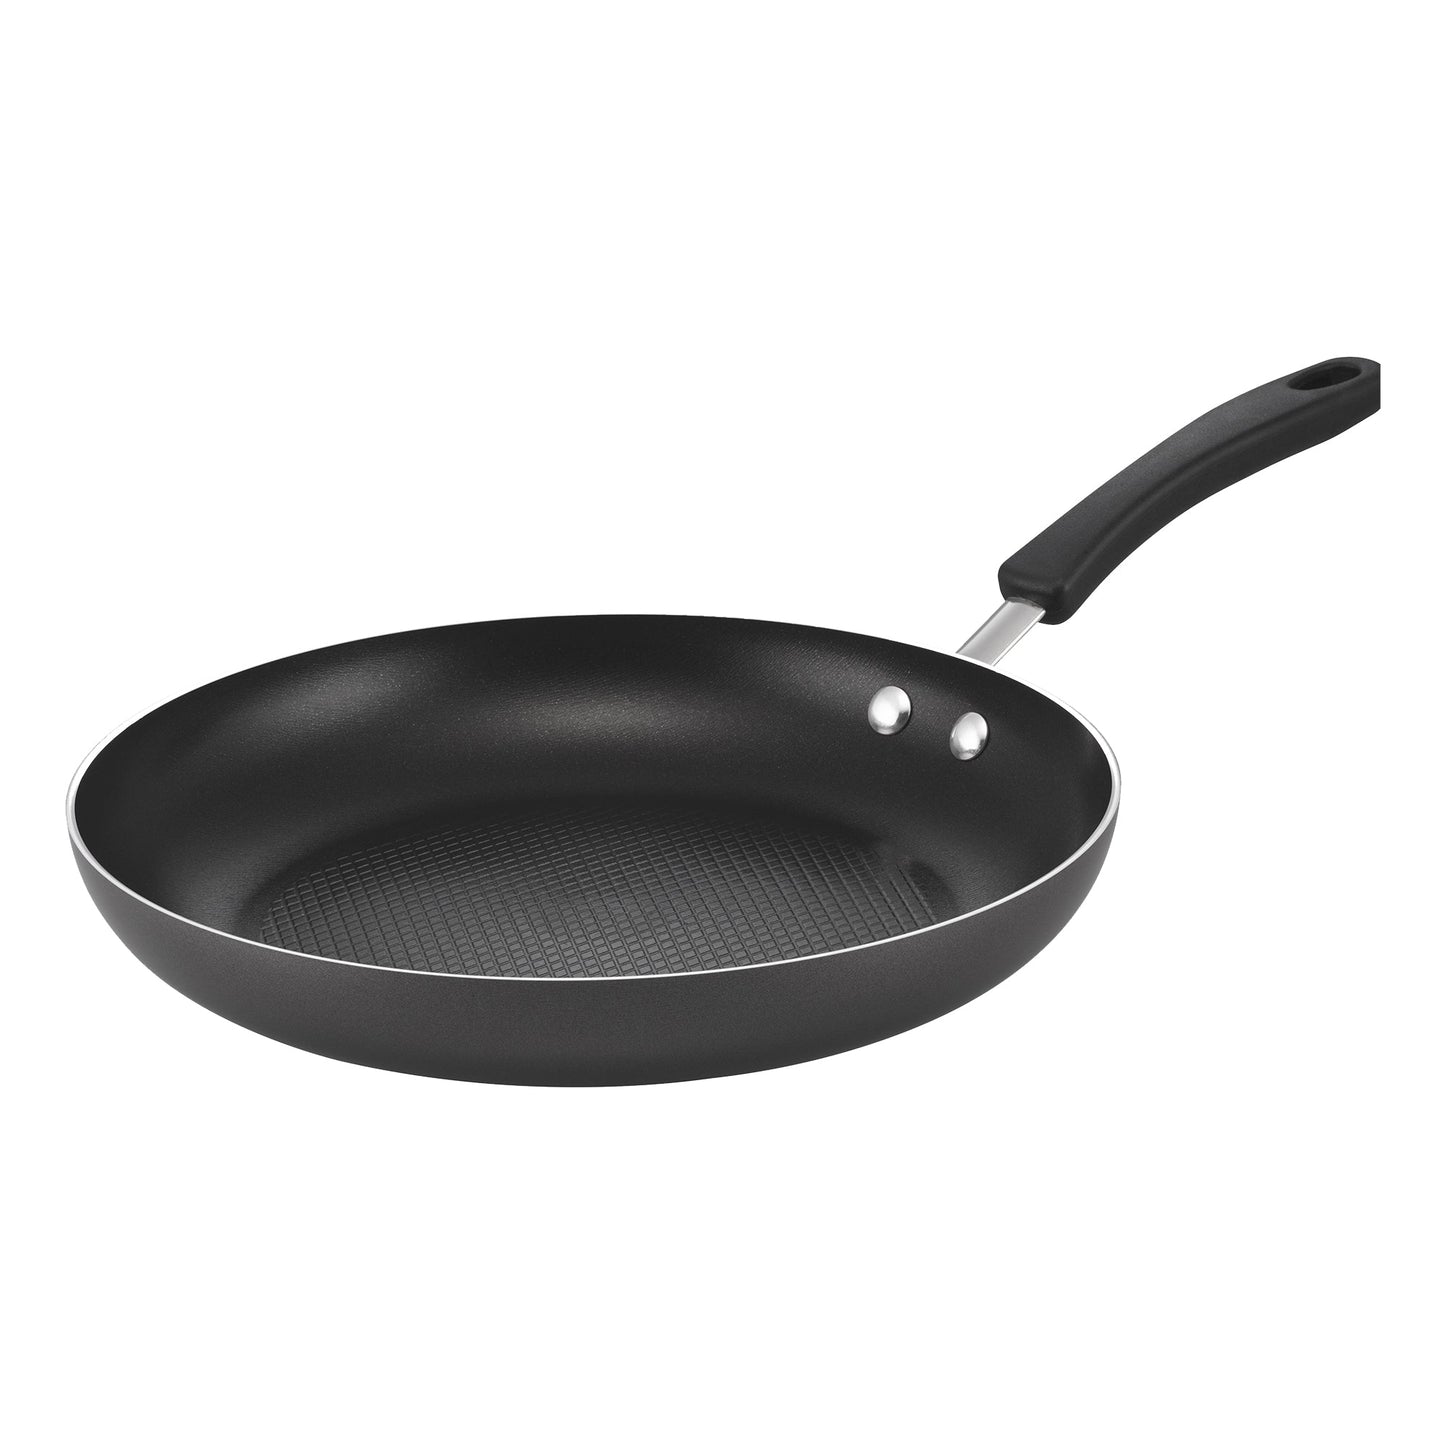 RACO Foundations Nonstick Induction Frypan 30cm